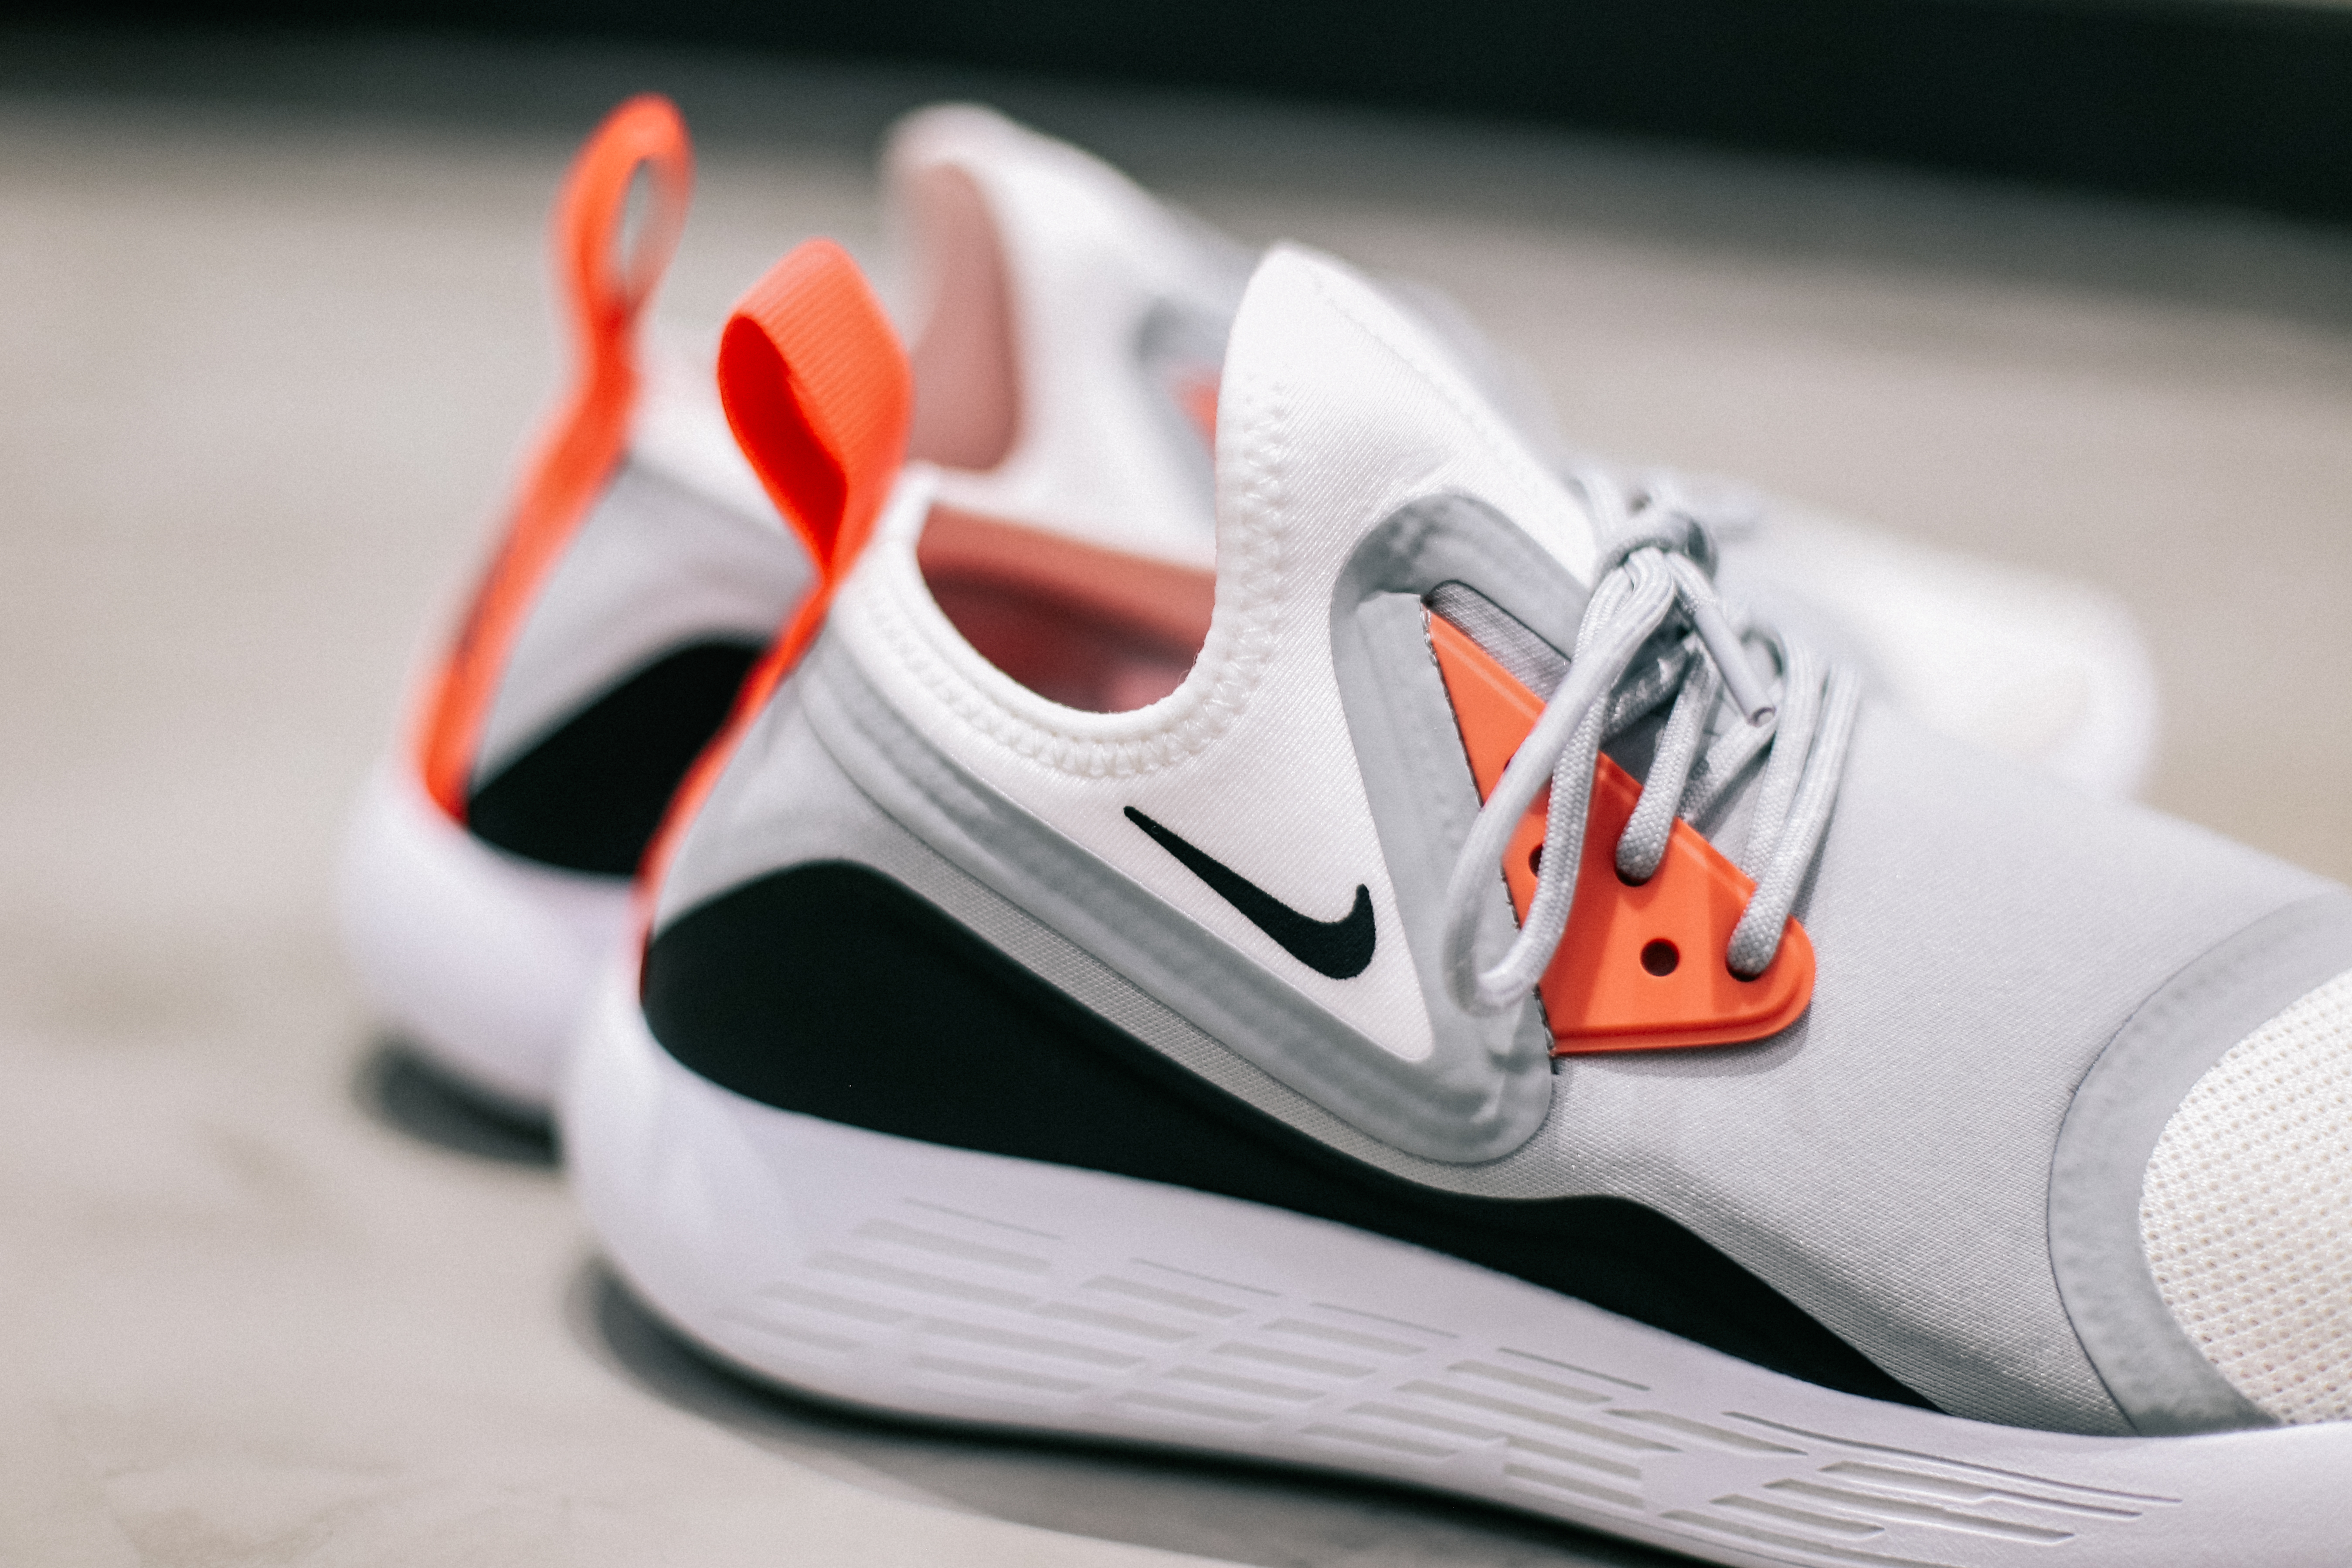 Nike LunarCharge BN "Infrared"